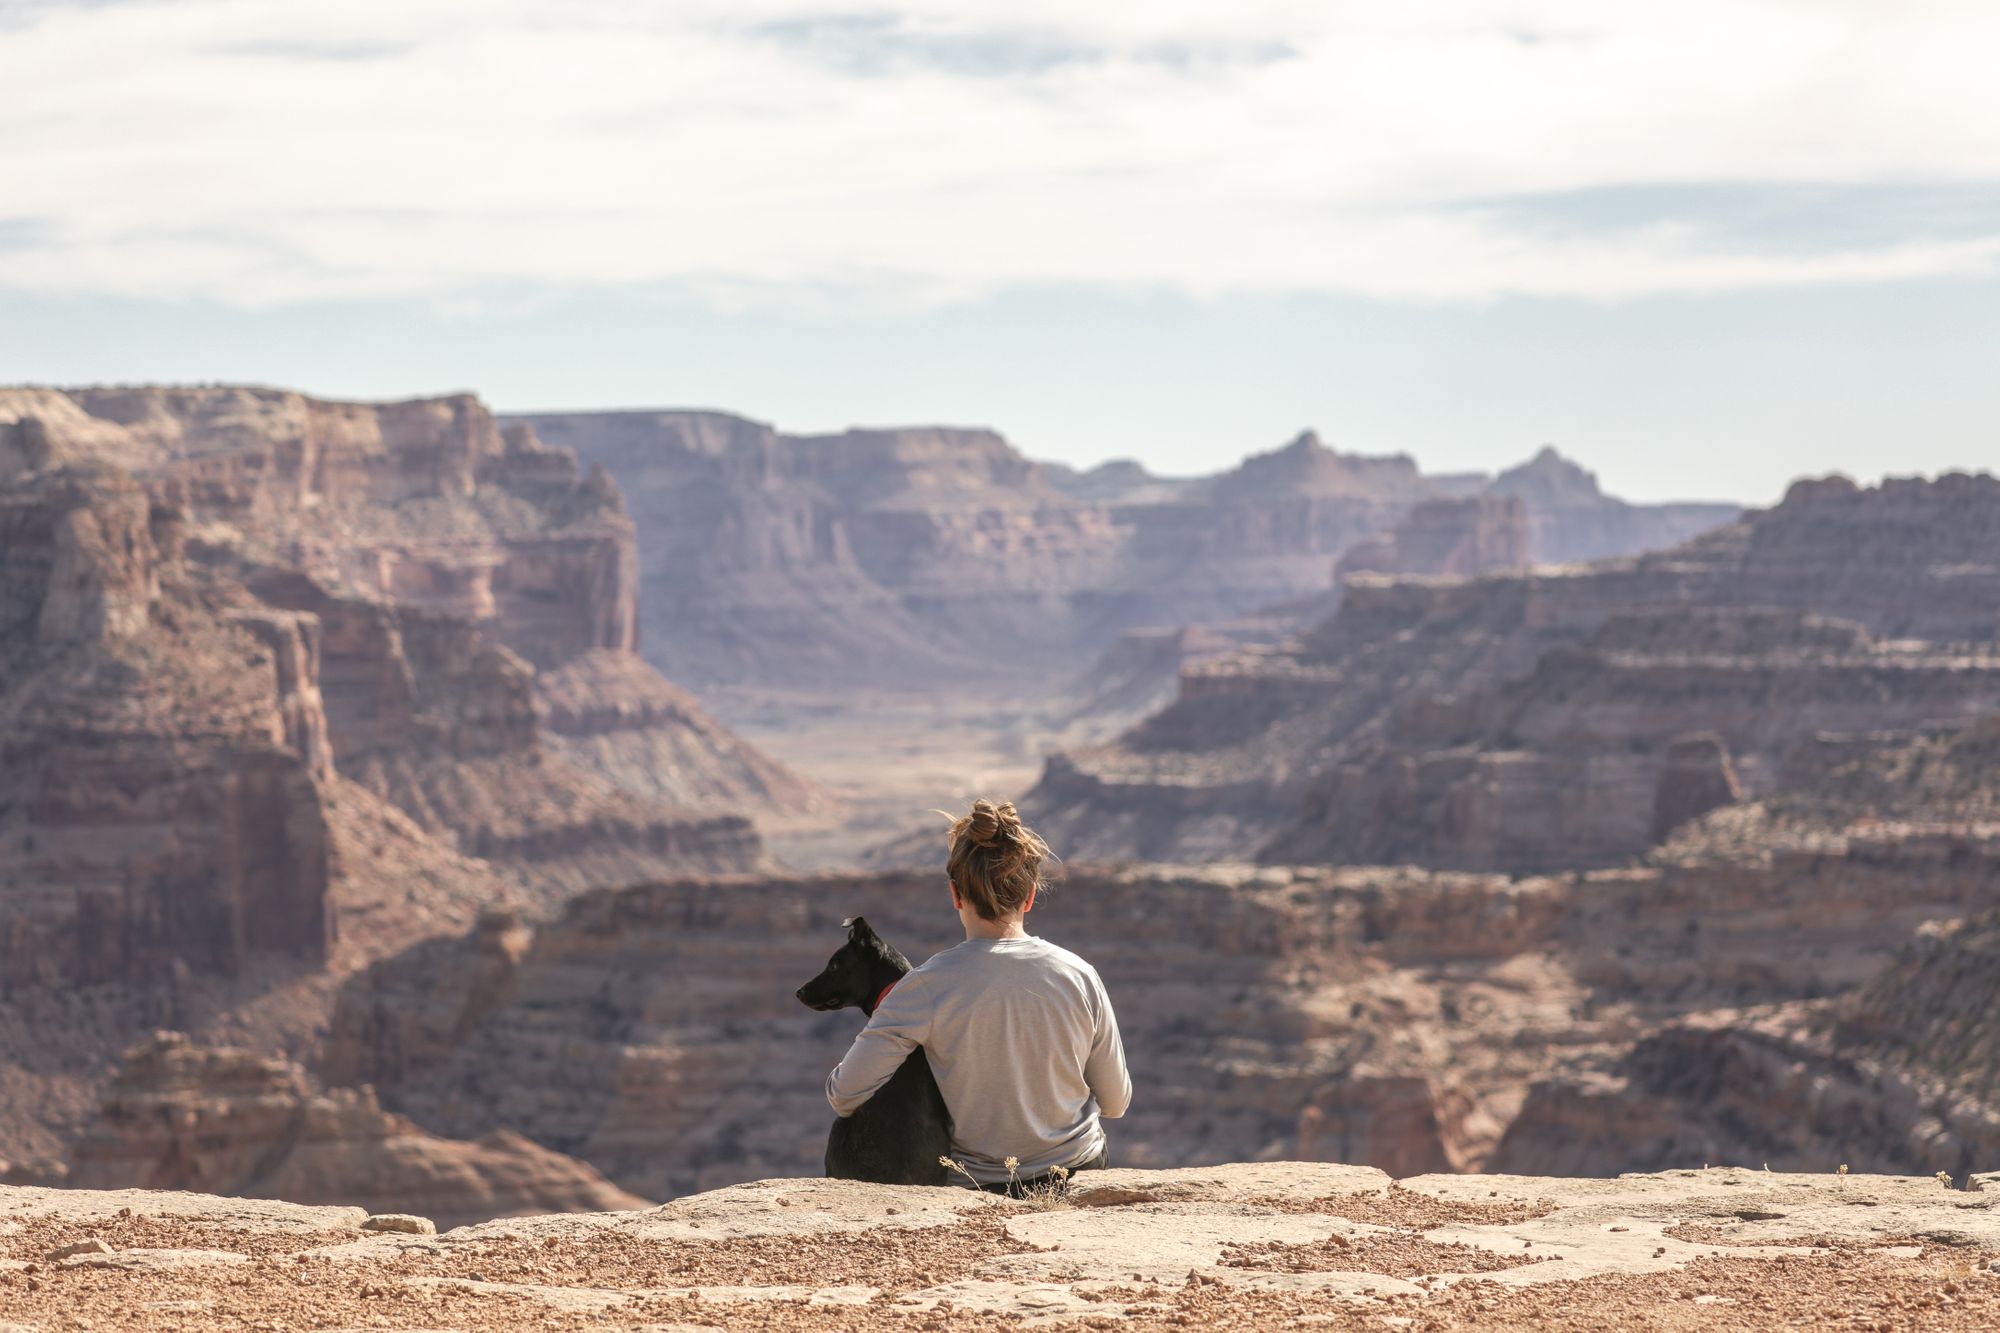 woman-with-dog-ad-the-edge-of-a-canyon-in-utah